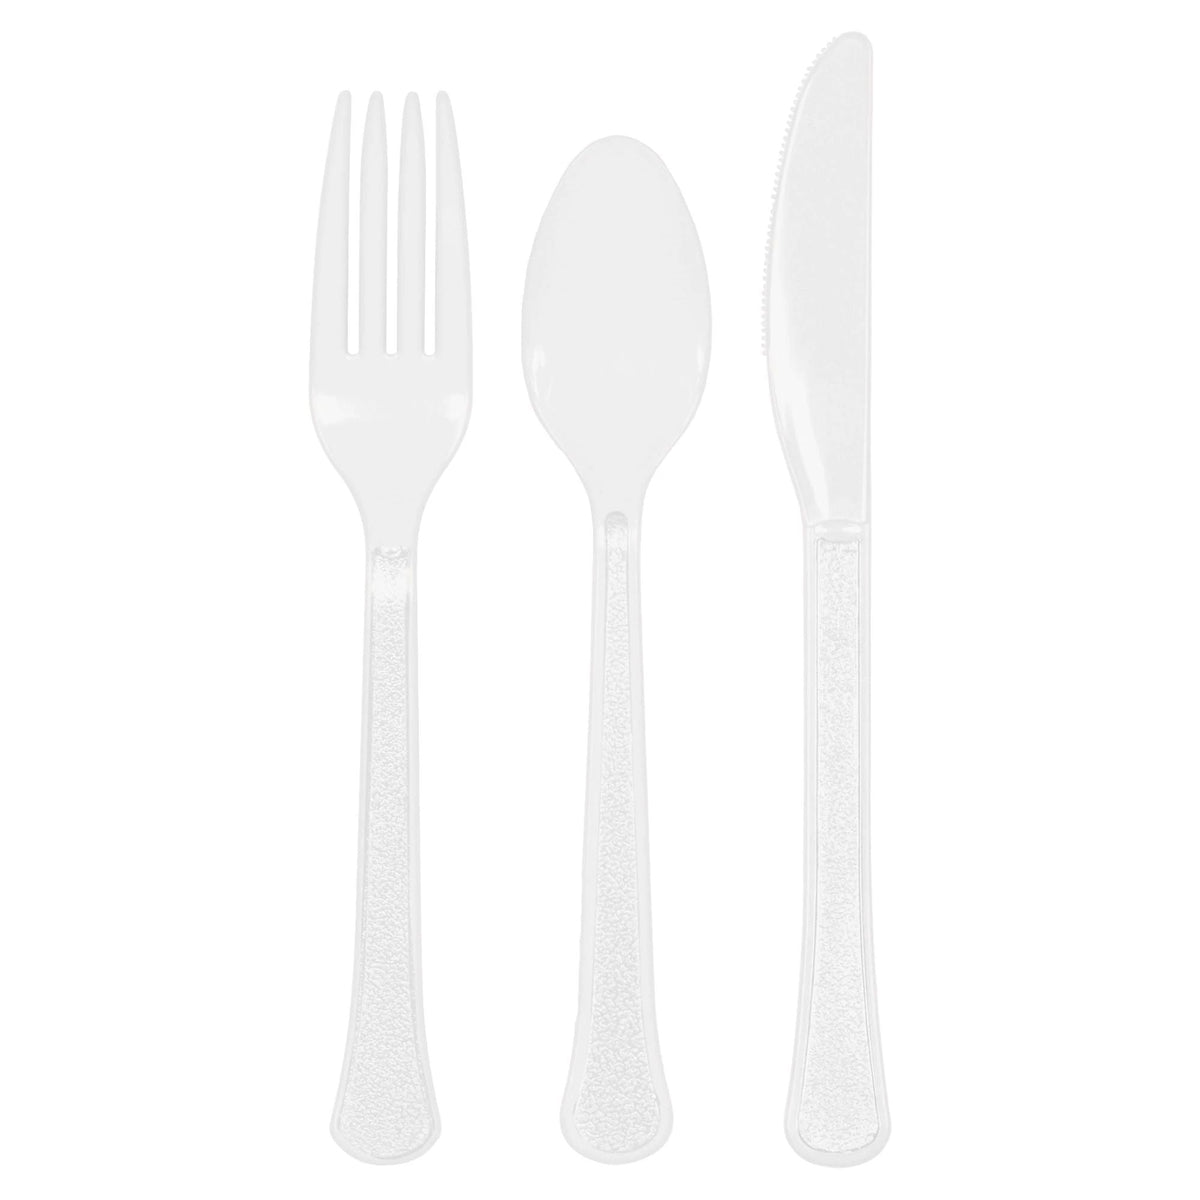 AMSCAN CA Disposable-Plasticware Frosty White Plastic Assorted Cutlery, 24 Count